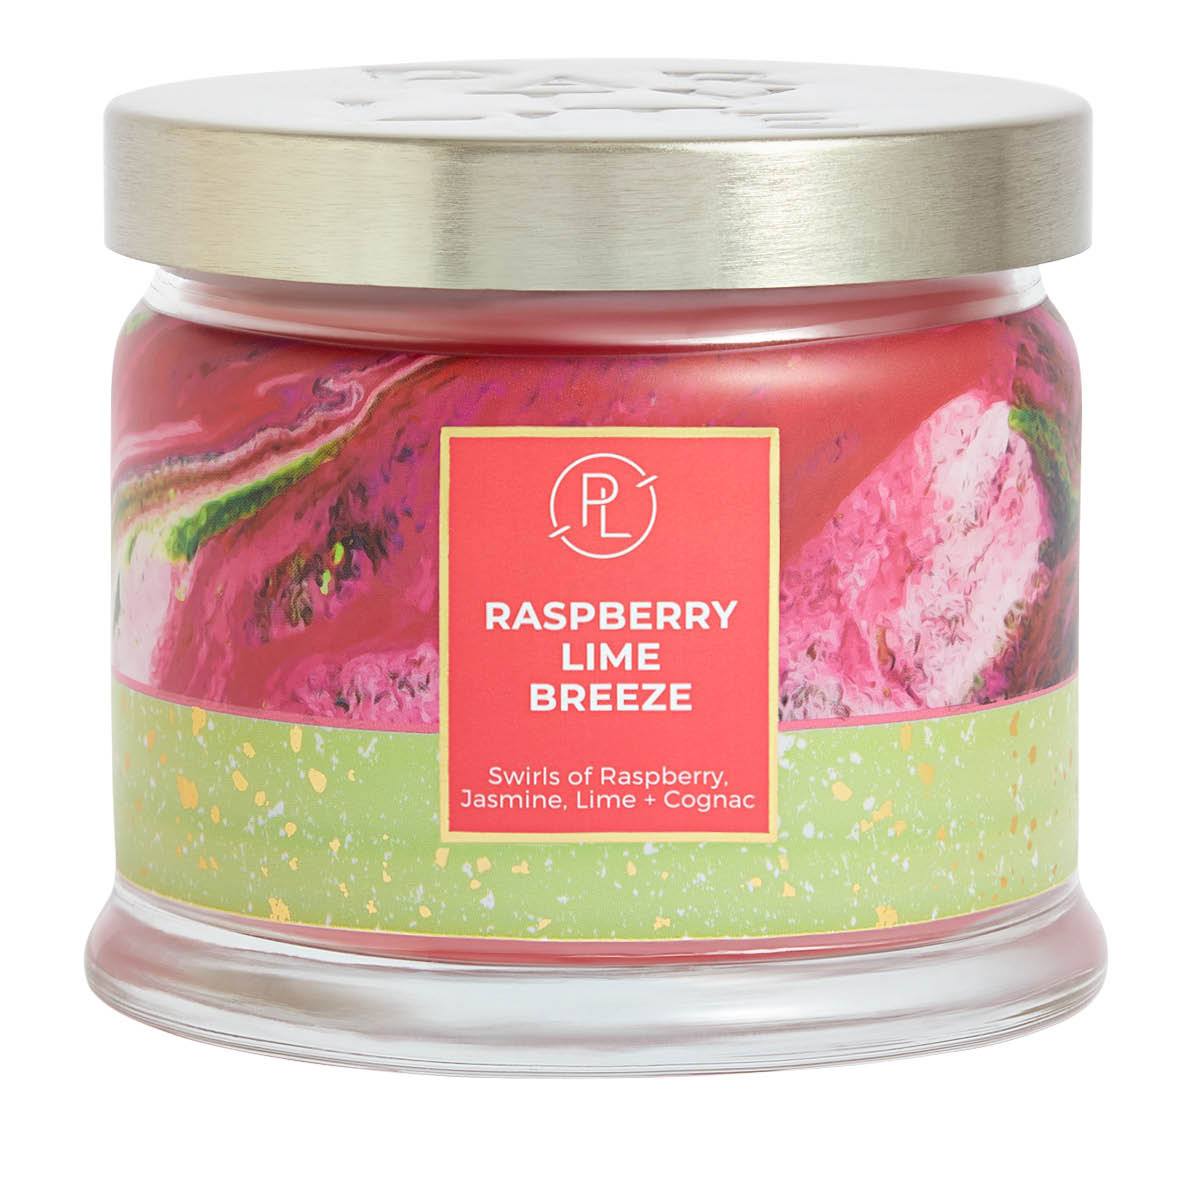 Raspberry Lime Breeze 3-Wick Jar Candle - PartyLite US